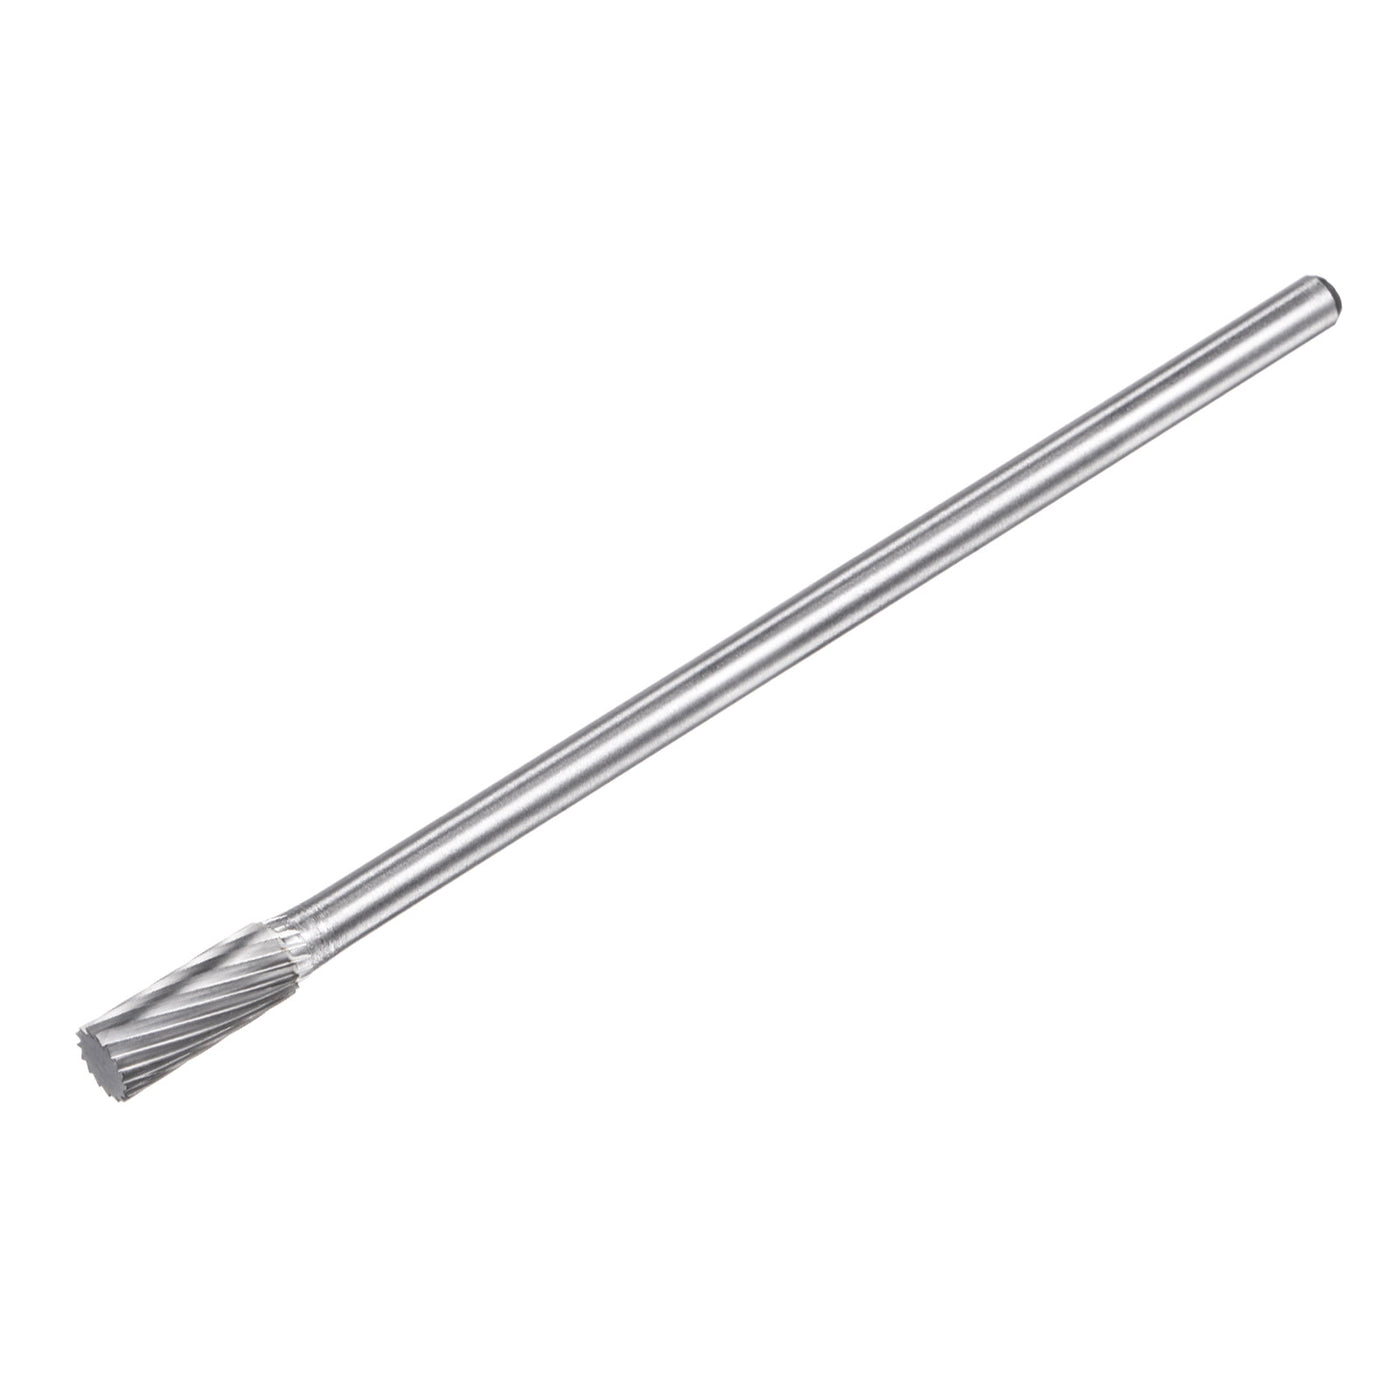 uxcell Uxcell 8mm x 150mm 6mm Shank Single Cut Cylinder Carbide Tip Rotary Files